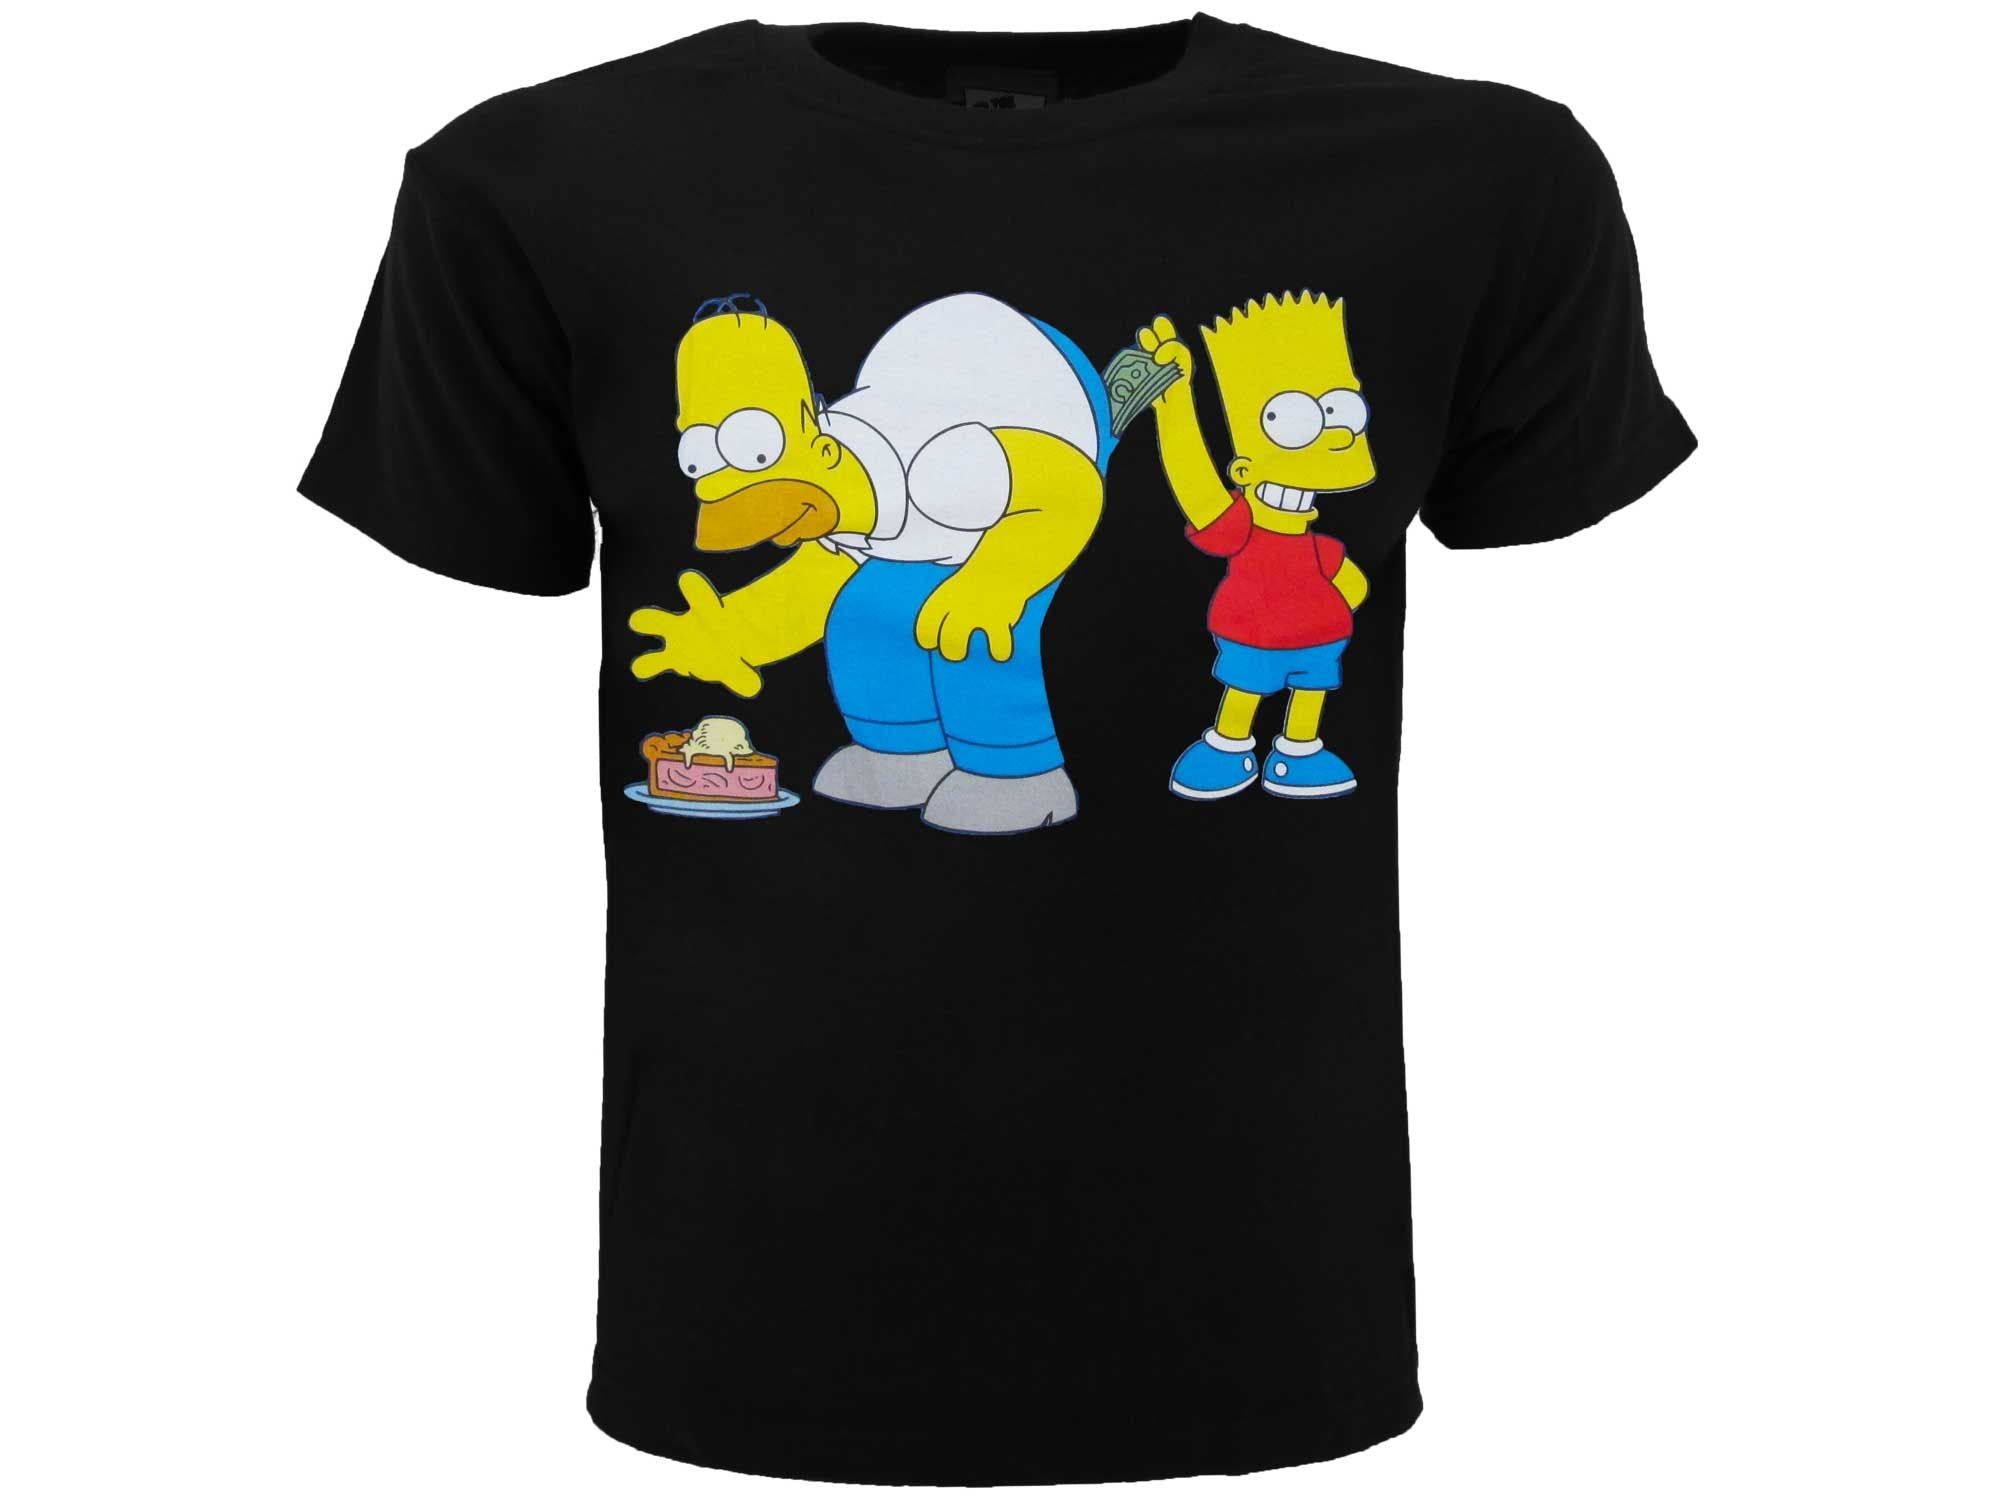 THE SIMPSONS : DOLLARS T-shirt 7/8 nera - Disponibile in 2/3 giorni lavorativi GED